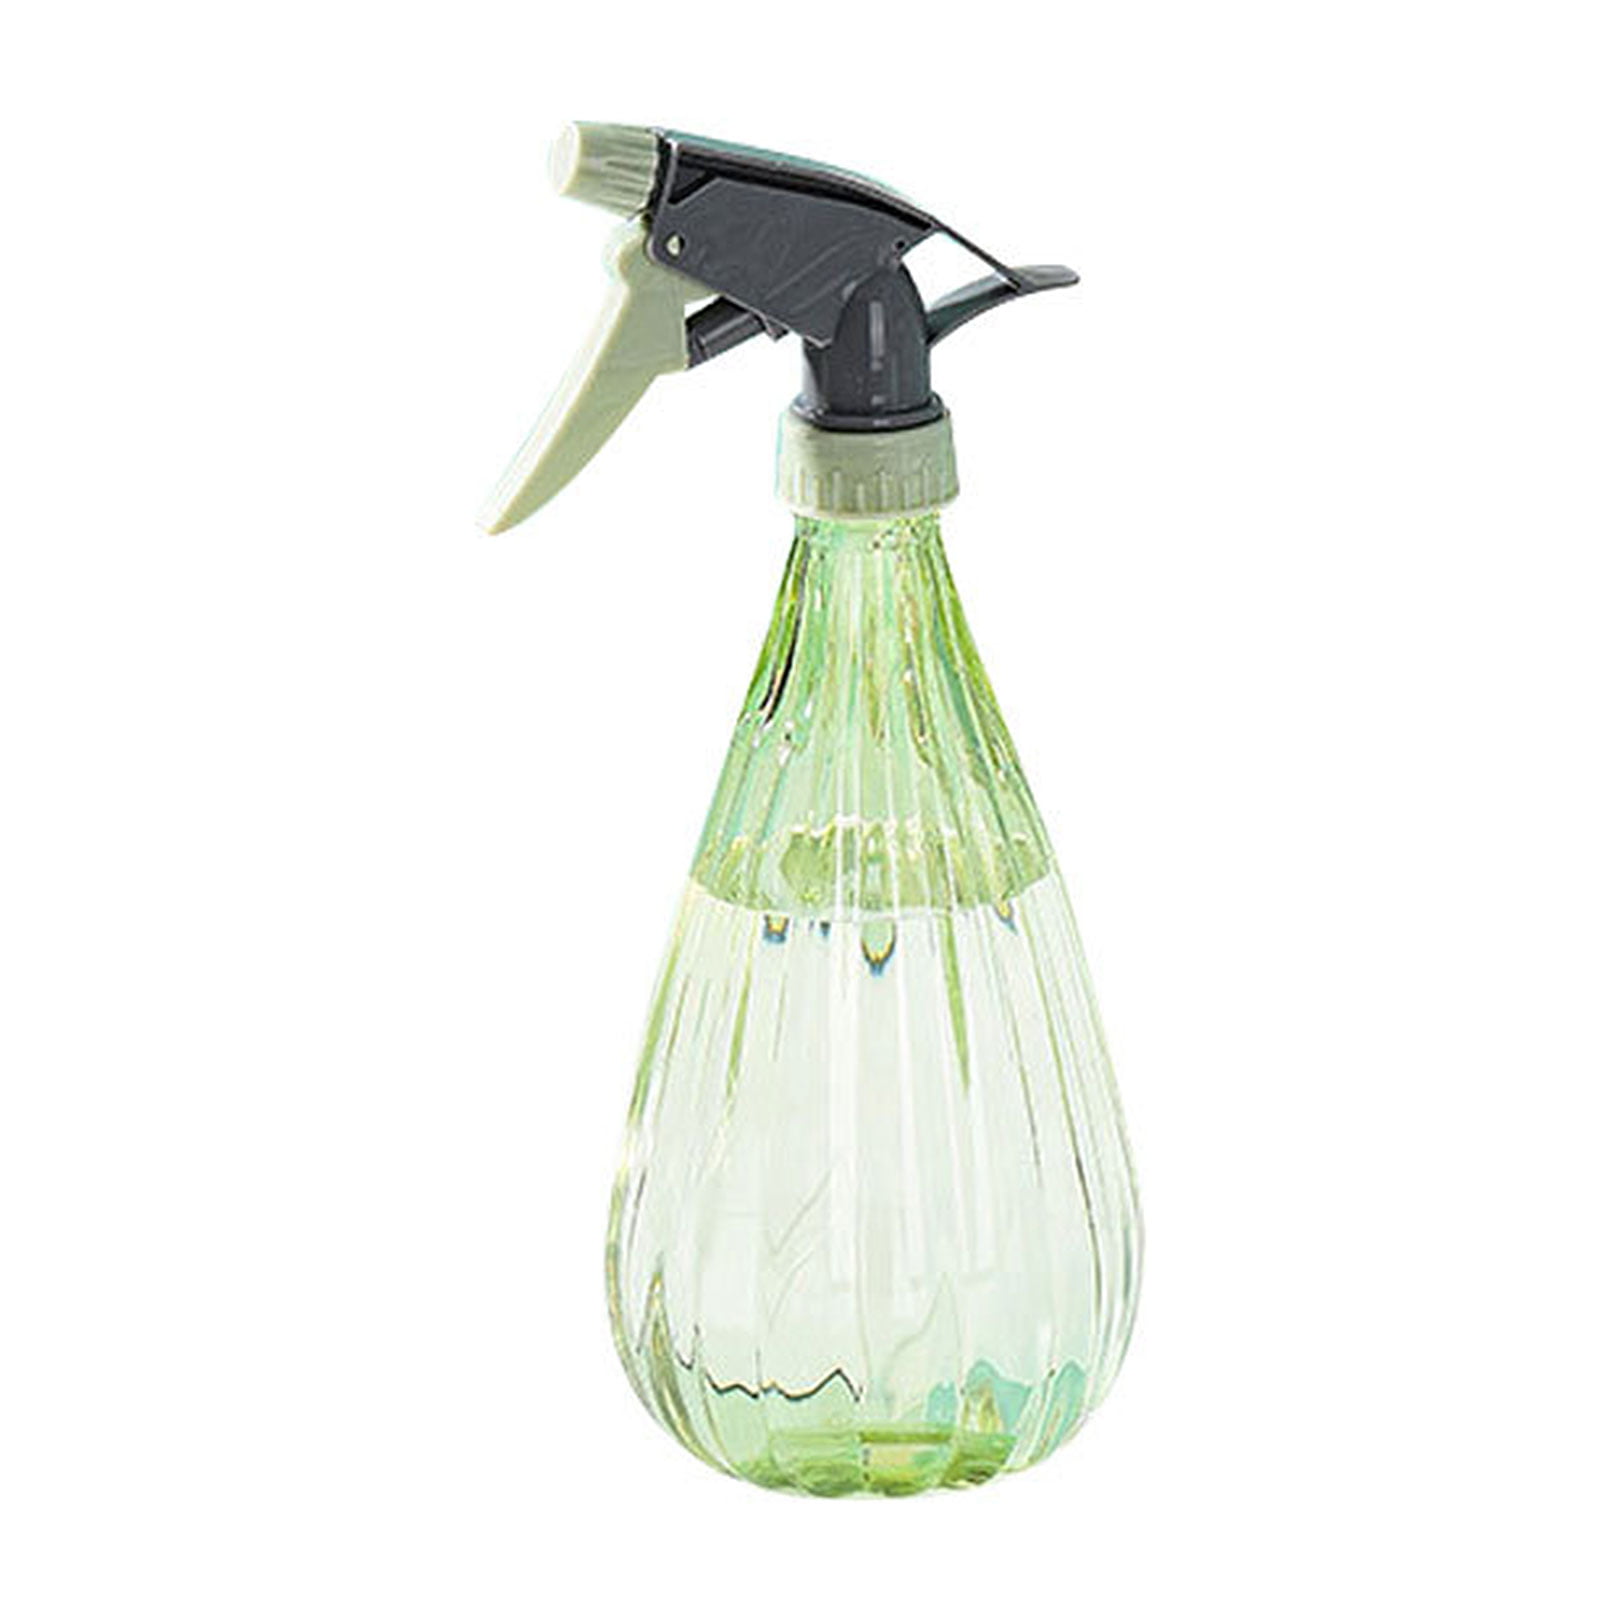 Water Spray Bottle 600ML Refillable Container Watering Pot Misting Bottle for Cleaning Watering Travel Hairdressing Gardening Kitchen